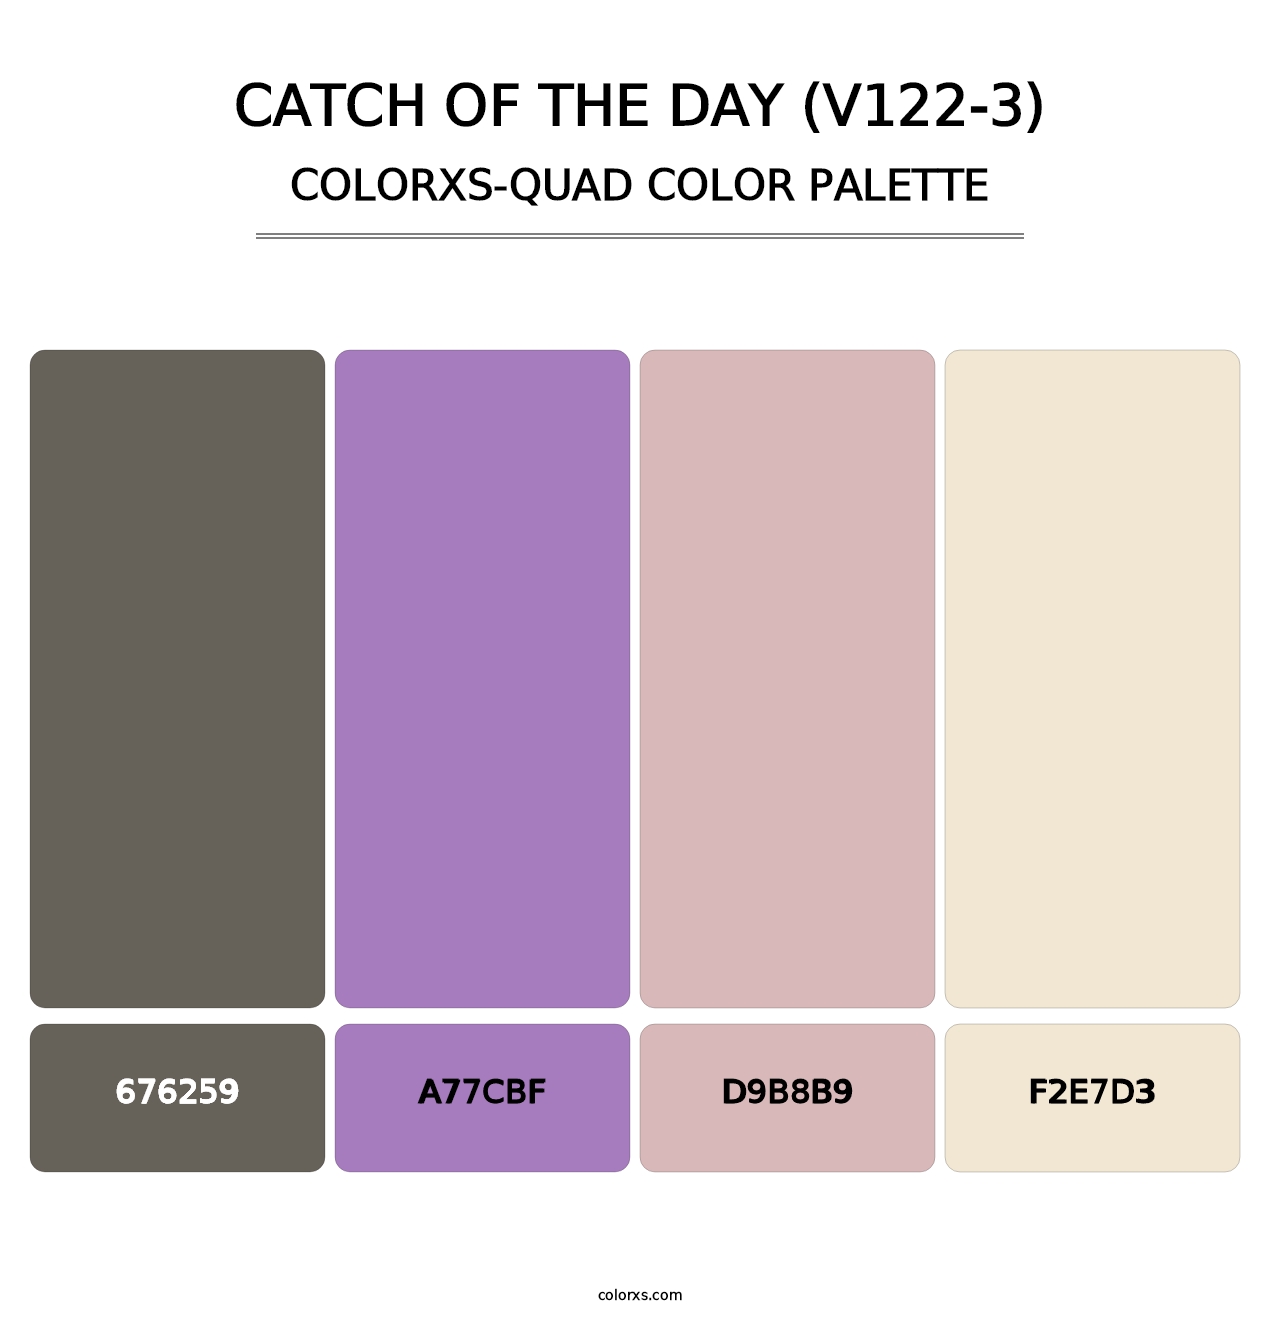 Catch of the Day (V122-3) - Colorxs Quad Palette